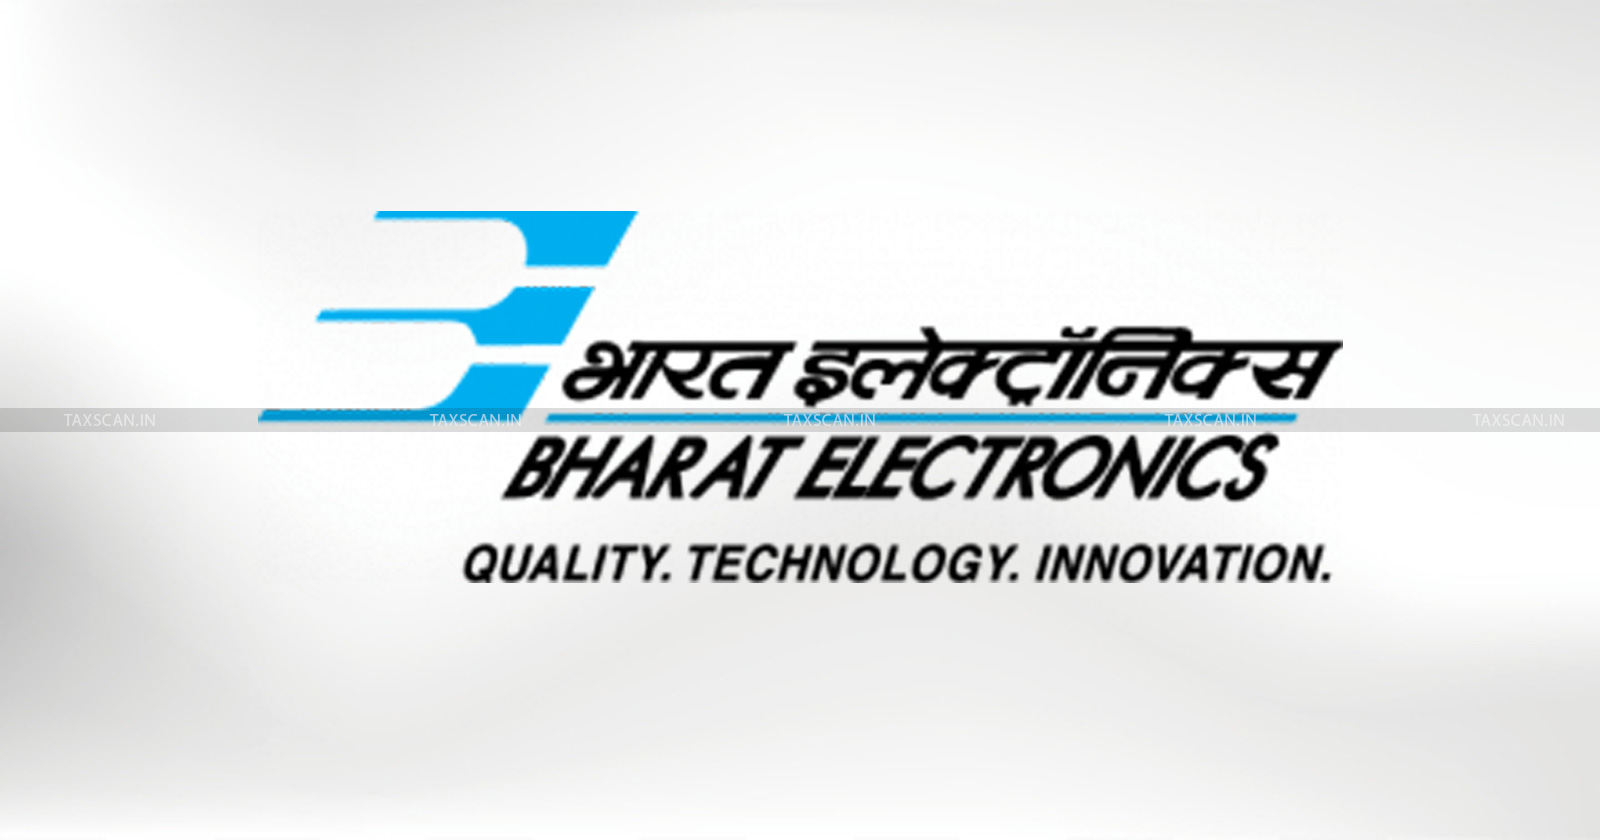 Relief - Bharat Electronics - CESTAT - Quashes - Service Tax Demand - Receiving Overhauling Charges - Repair - Maintenance services - taxscan